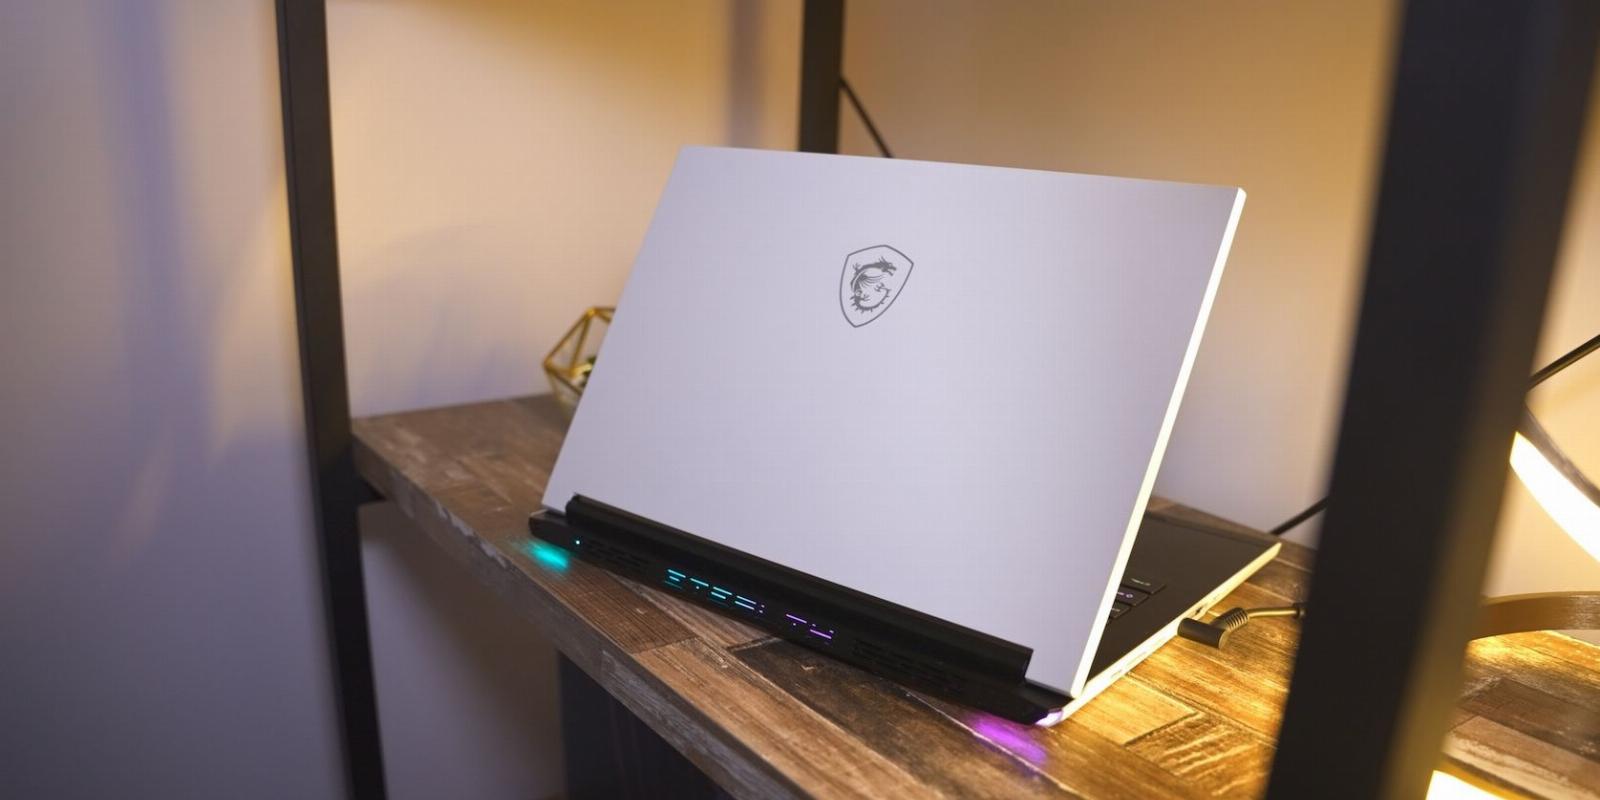 Here’s a Hands-On Look at Every New Laptop MSI Launched at CES 2023